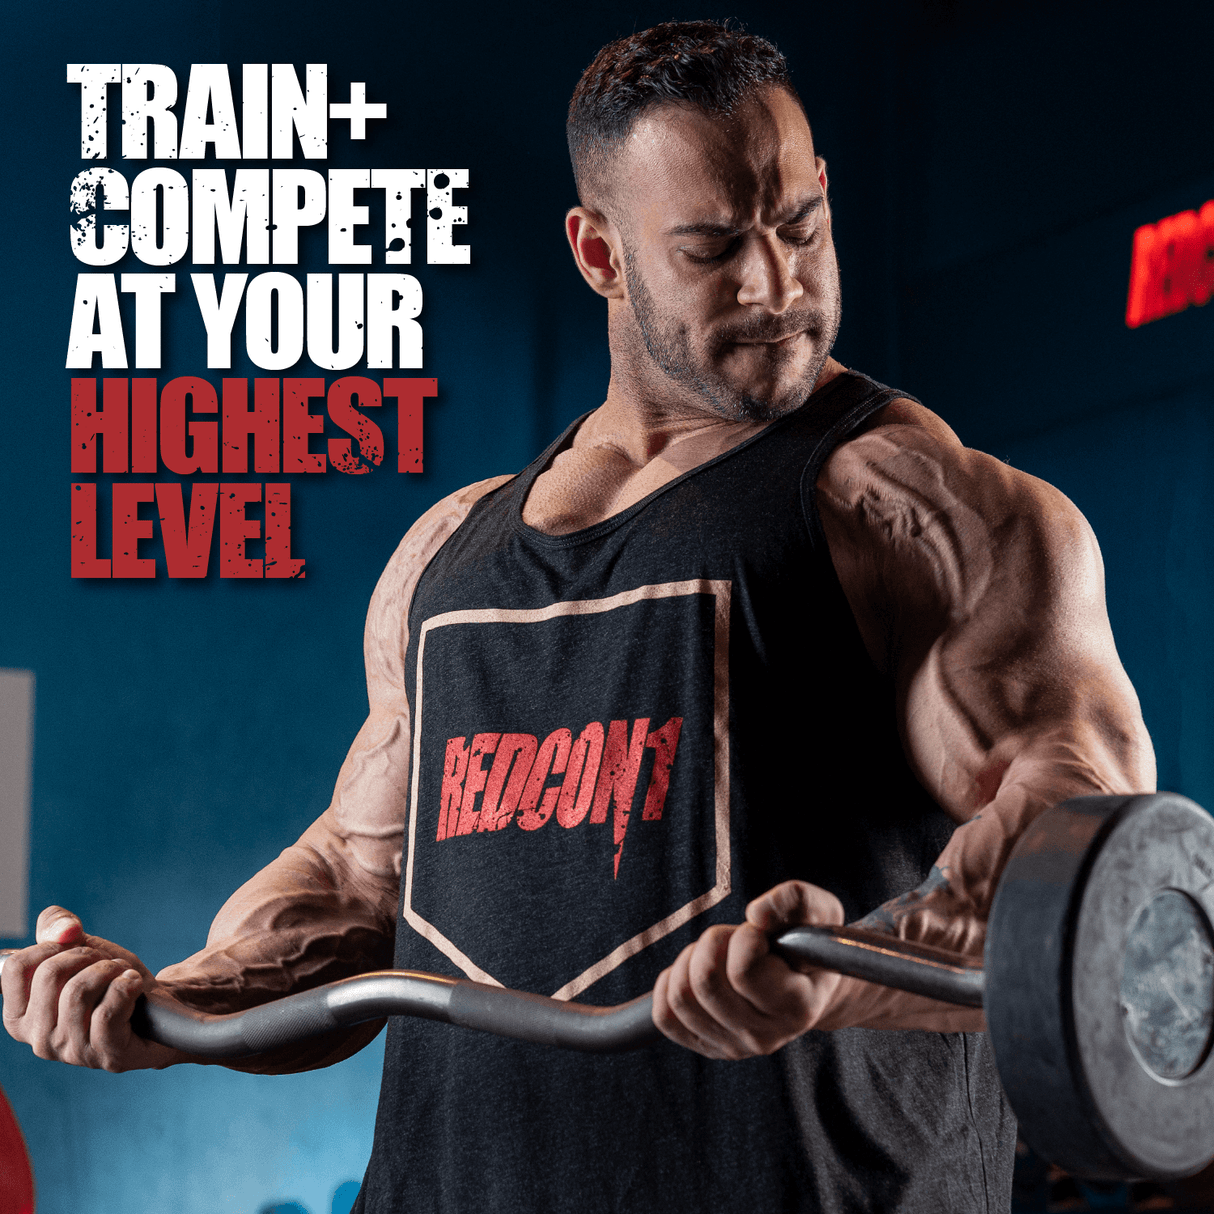 RedCon1 Total War Pre-workout - Complete Pre-Workout for Energy, Pumps & Focus